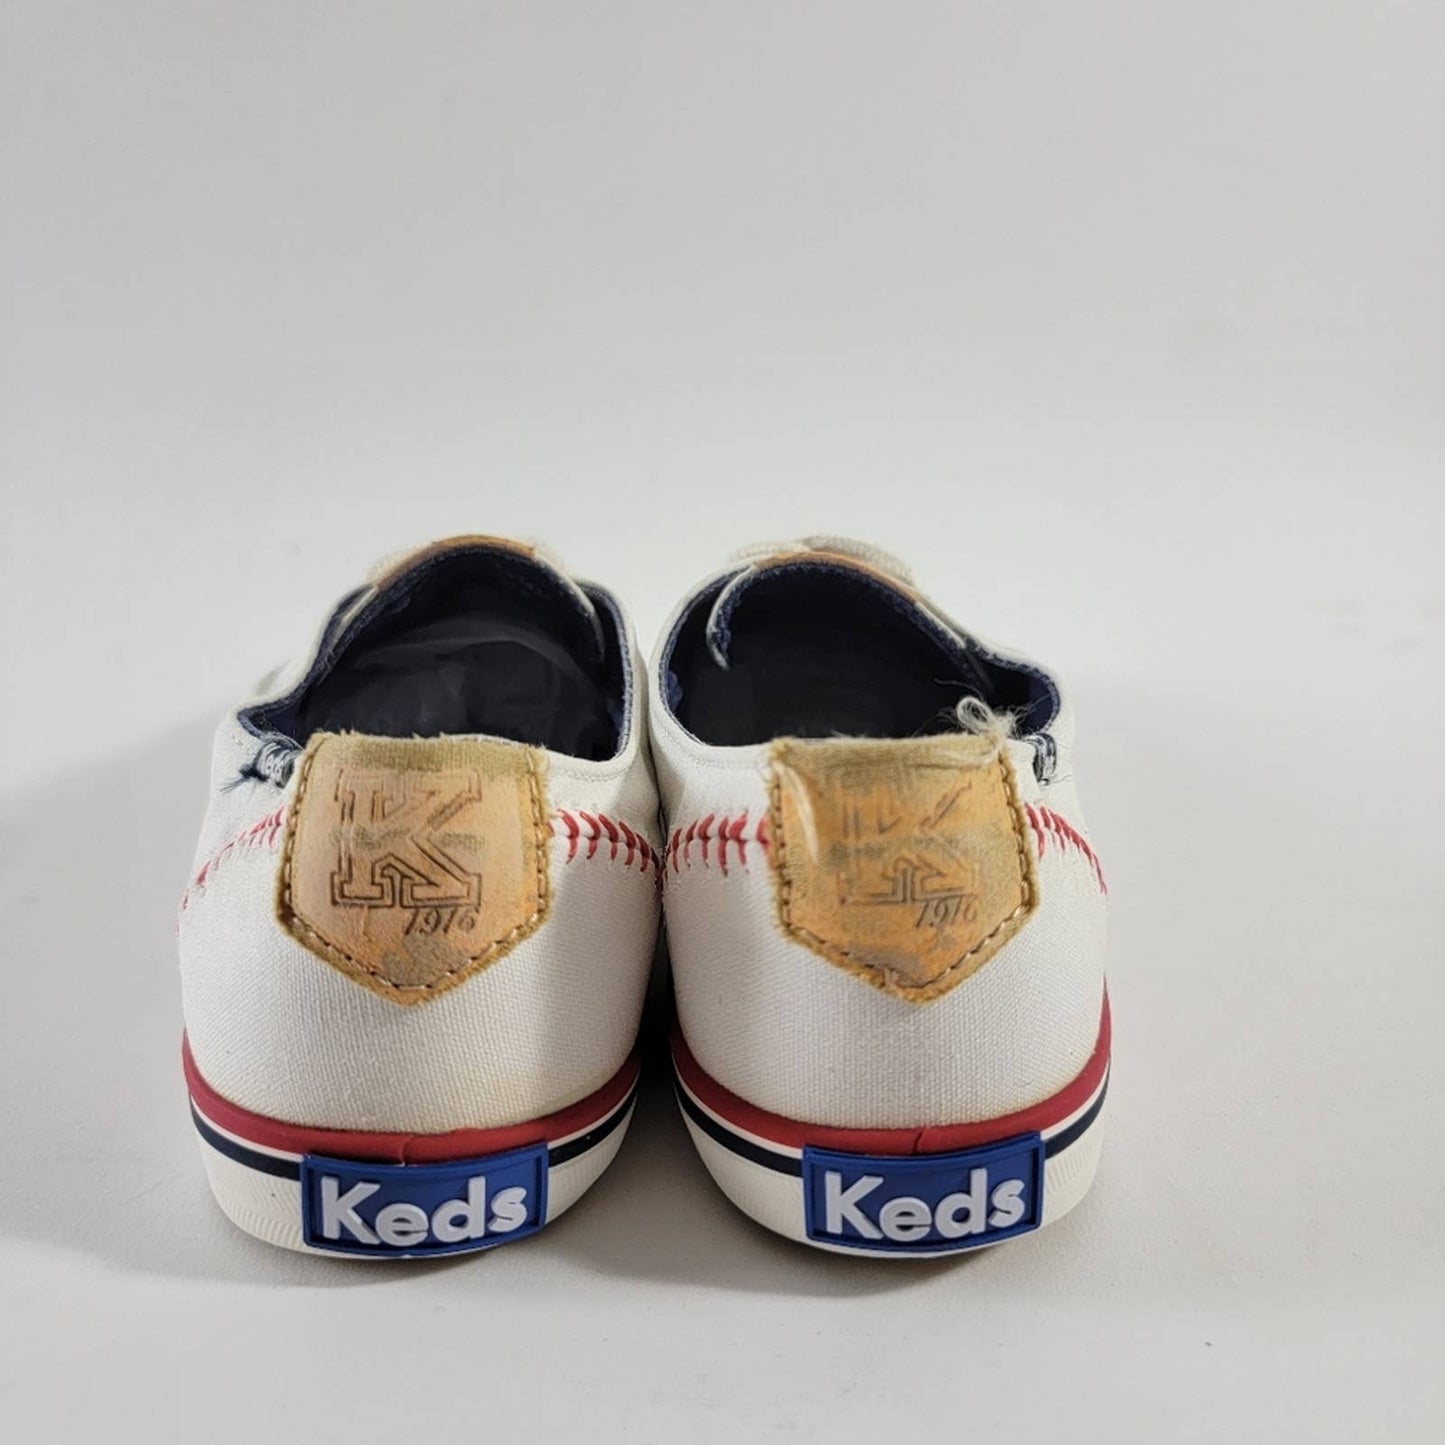 Keds Champion White Baseball Stitch Lace Up Low Top Sneakers - 6.5